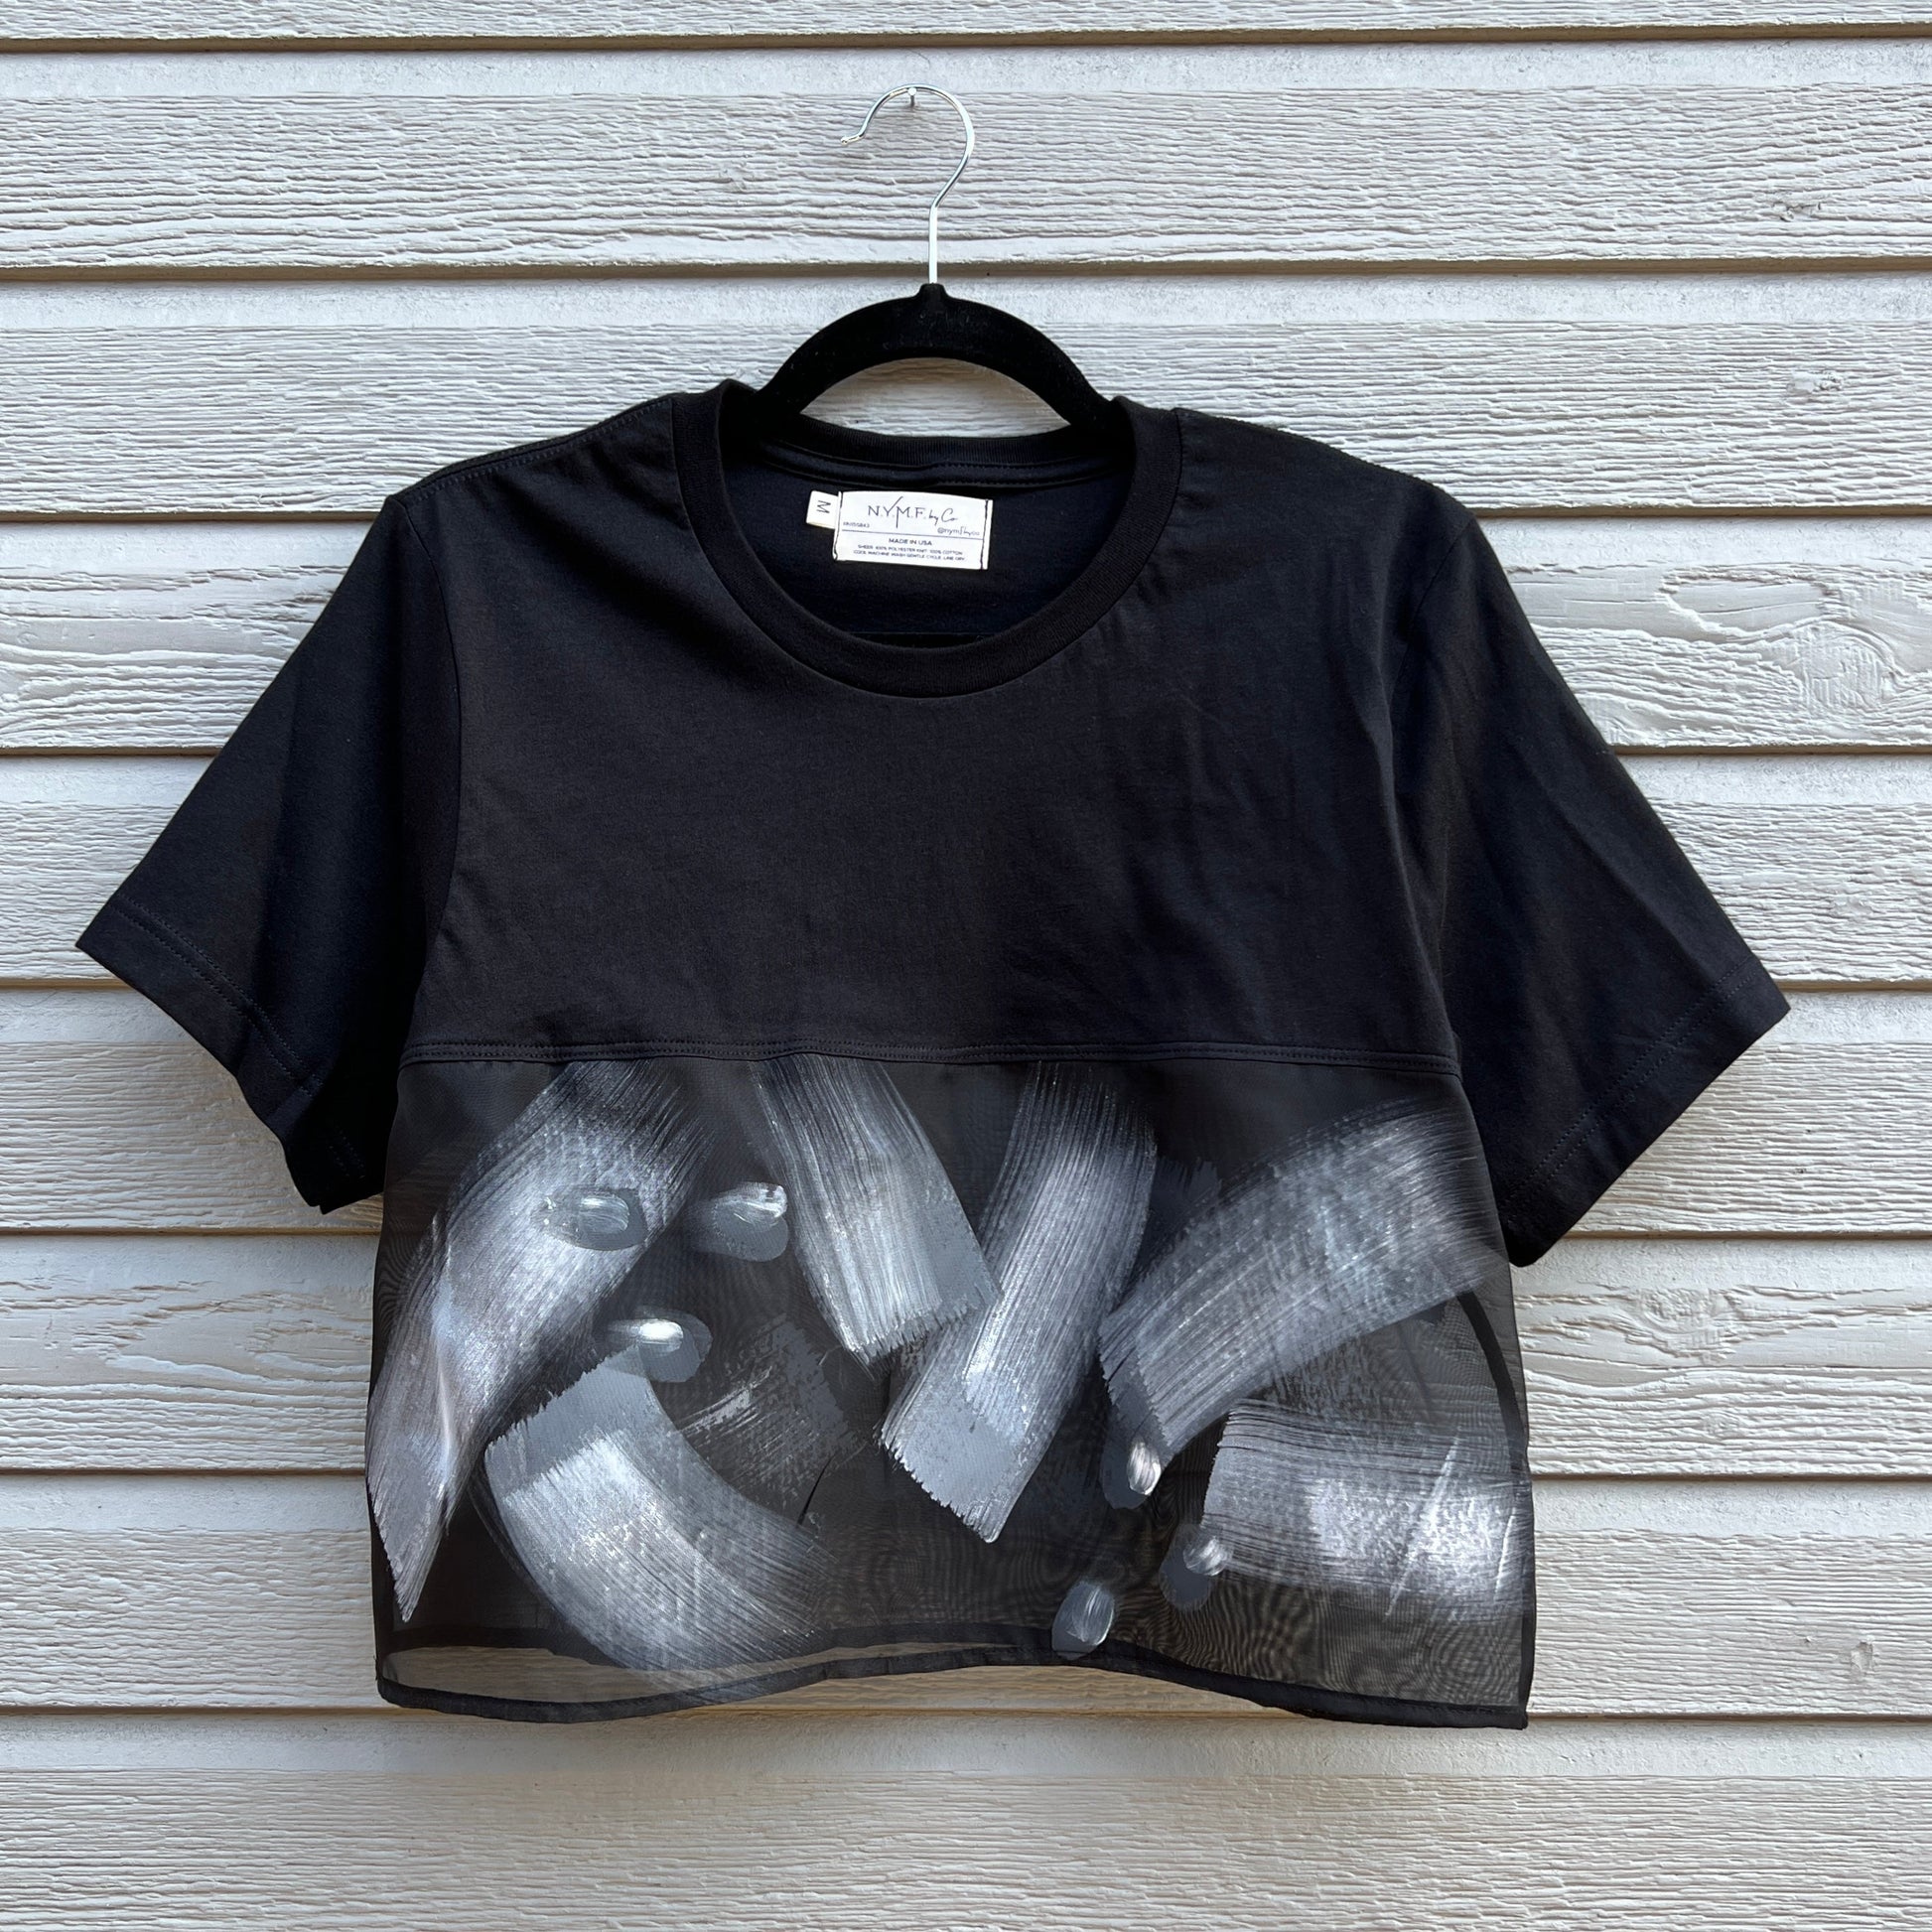 Black sheer sporty crop tee with artwork painted brushstrokes in shades of gray